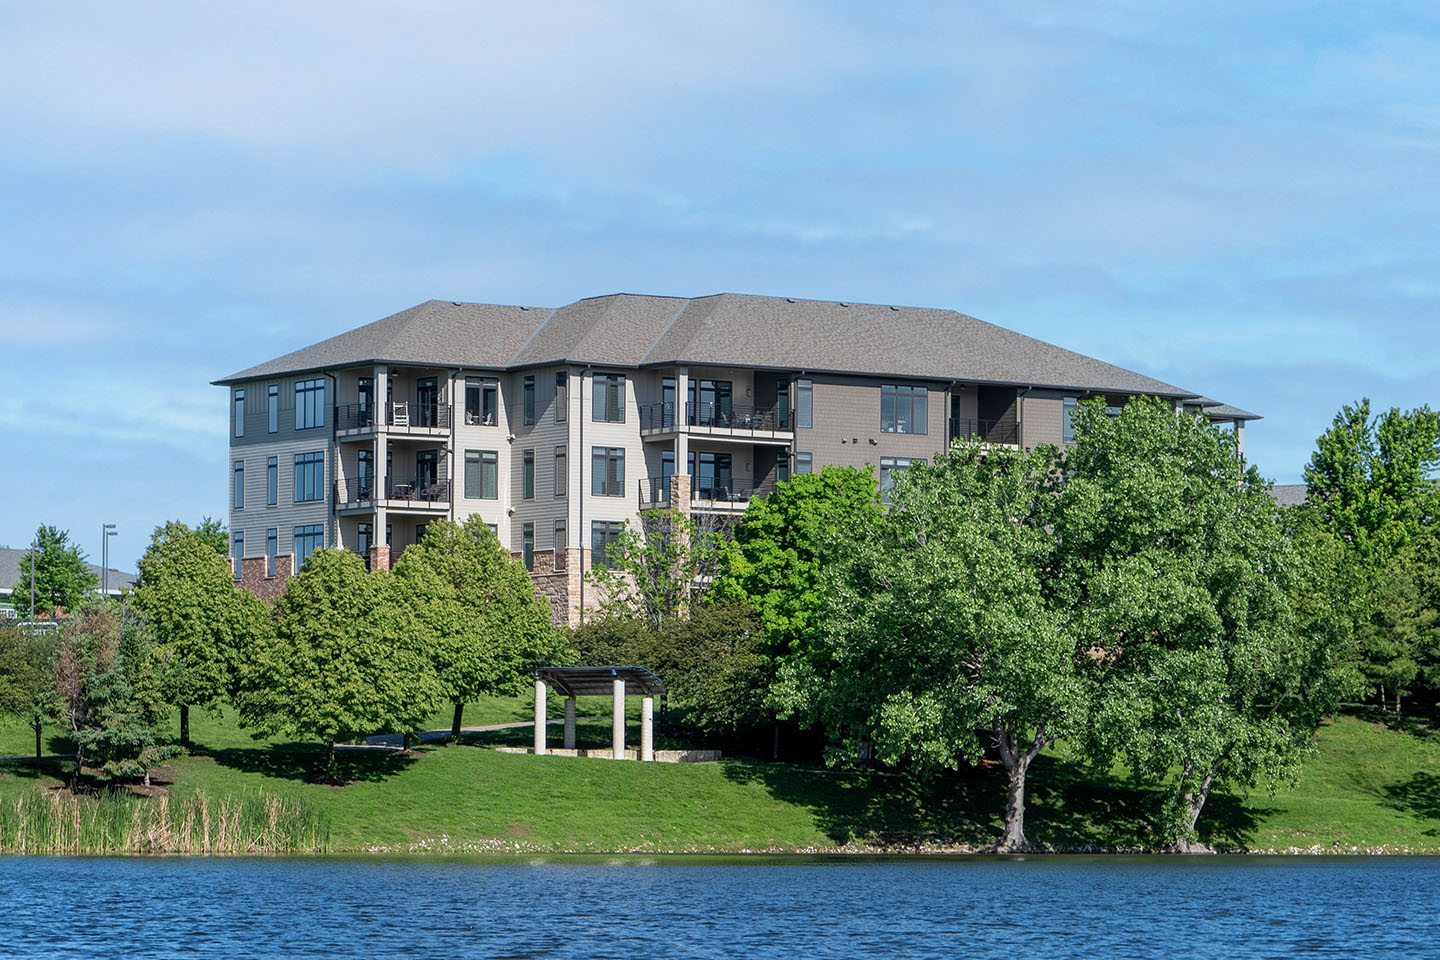 A view of Lakeside Lofts from across the lake.